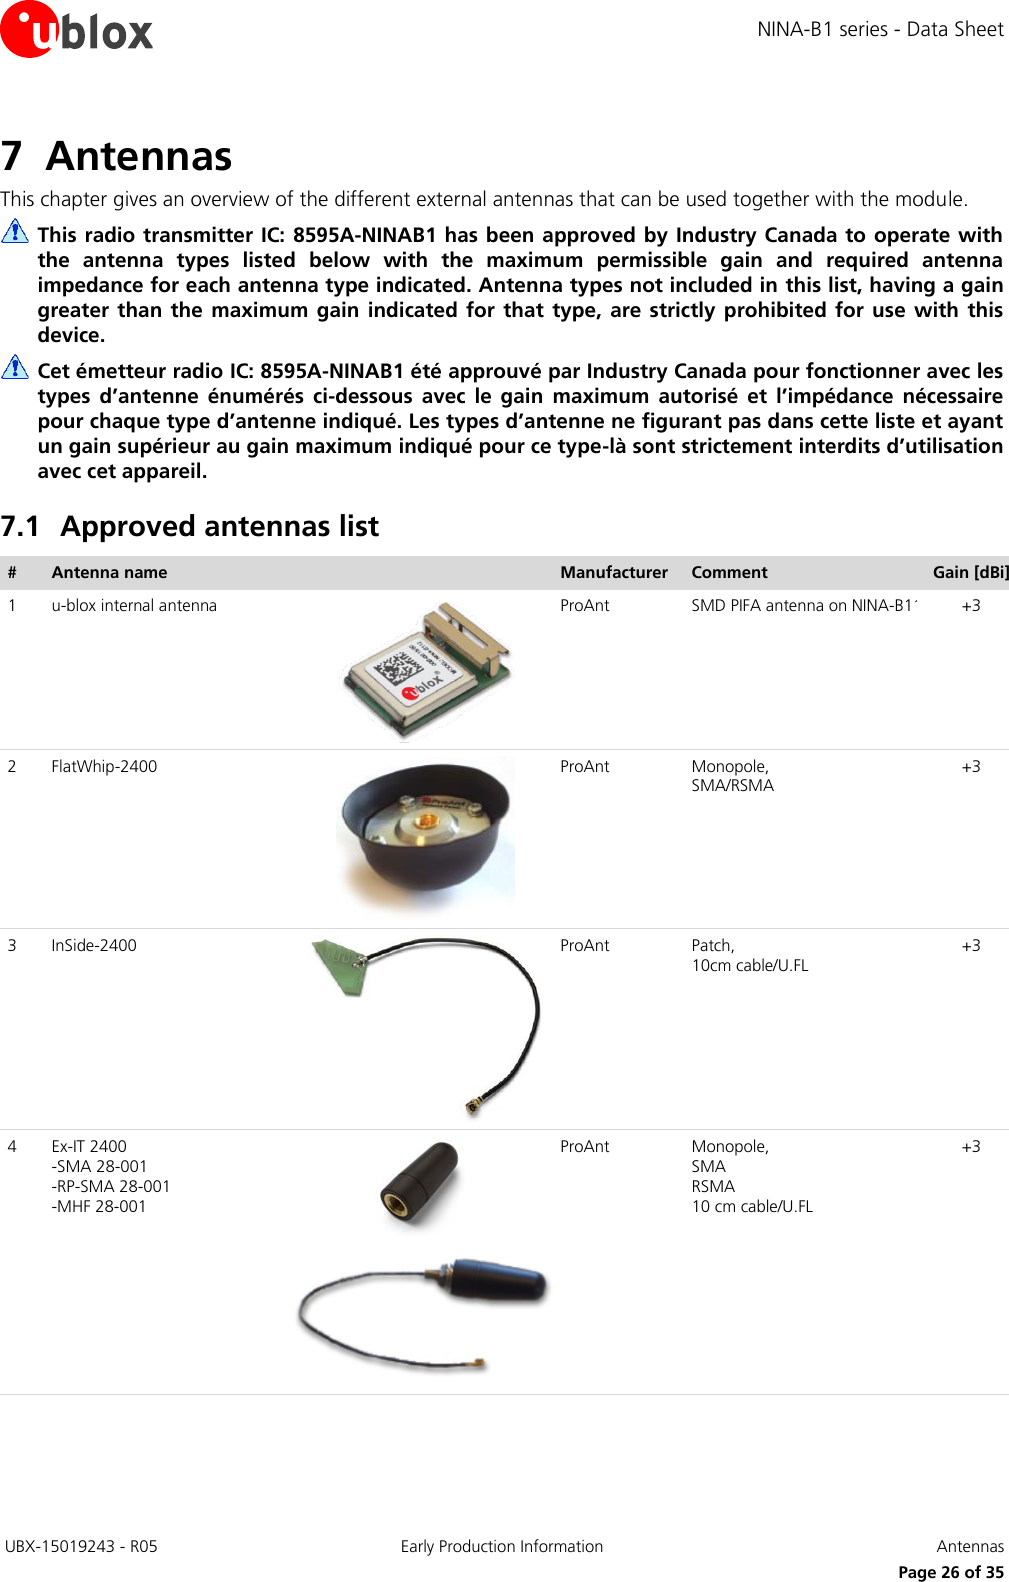 NINA-B1 series - Data Sheet  UBX-15019243 - R05 Early Production Information  Antennas     Page 26 of 35 7 Antennas This chapter gives an overview of the different external antennas that can be used together with the module.  This radio transmitter IC: 8595A-NINAB1 has been approved by Industry Canada to operate with the  antenna  types  listed  below  with  the  maximum  permissible  gain  and  required  antenna impedance for each antenna type indicated. Antenna types not included in this list, having a gain greater  than the maximum gain  indicated  for  that type,  are  strictly  prohibited for  use  with  this device.  Cet émetteur radio IC: 8595A-NINAB1 été approuvé par Industry Canada pour fonctionner avec les types  d’antenne  énumérés  ci-dessous  avec  le  gain  maximum  autorisé  et  l’impédance  nécessaire pour chaque type d’antenne indiqué. Les types d’antenne ne figurant pas dans cette liste et ayant un gain supérieur au gain maximum indiqué pour ce type-là sont strictement interdits d’utilisation avec cet appareil. 7.1 Approved antennas list # Antenna name  Manufacturer Comment Gain [dBi] 1 u-blox internal antenna  ProAnt SMD PIFA antenna on NINA-B112 +3 2 FlatWhip-2400  ProAnt Monopole,  SMA/RSMA  +3 3 InSide-2400  ProAnt Patch,  10cm cable/U.FL +3 4 Ex-IT 2400  -SMA 28-001  -RP-SMA 28-001  -MHF 28-001   ProAnt Monopole,  SMA  RSMA  10 cm cable/U.FL +3 